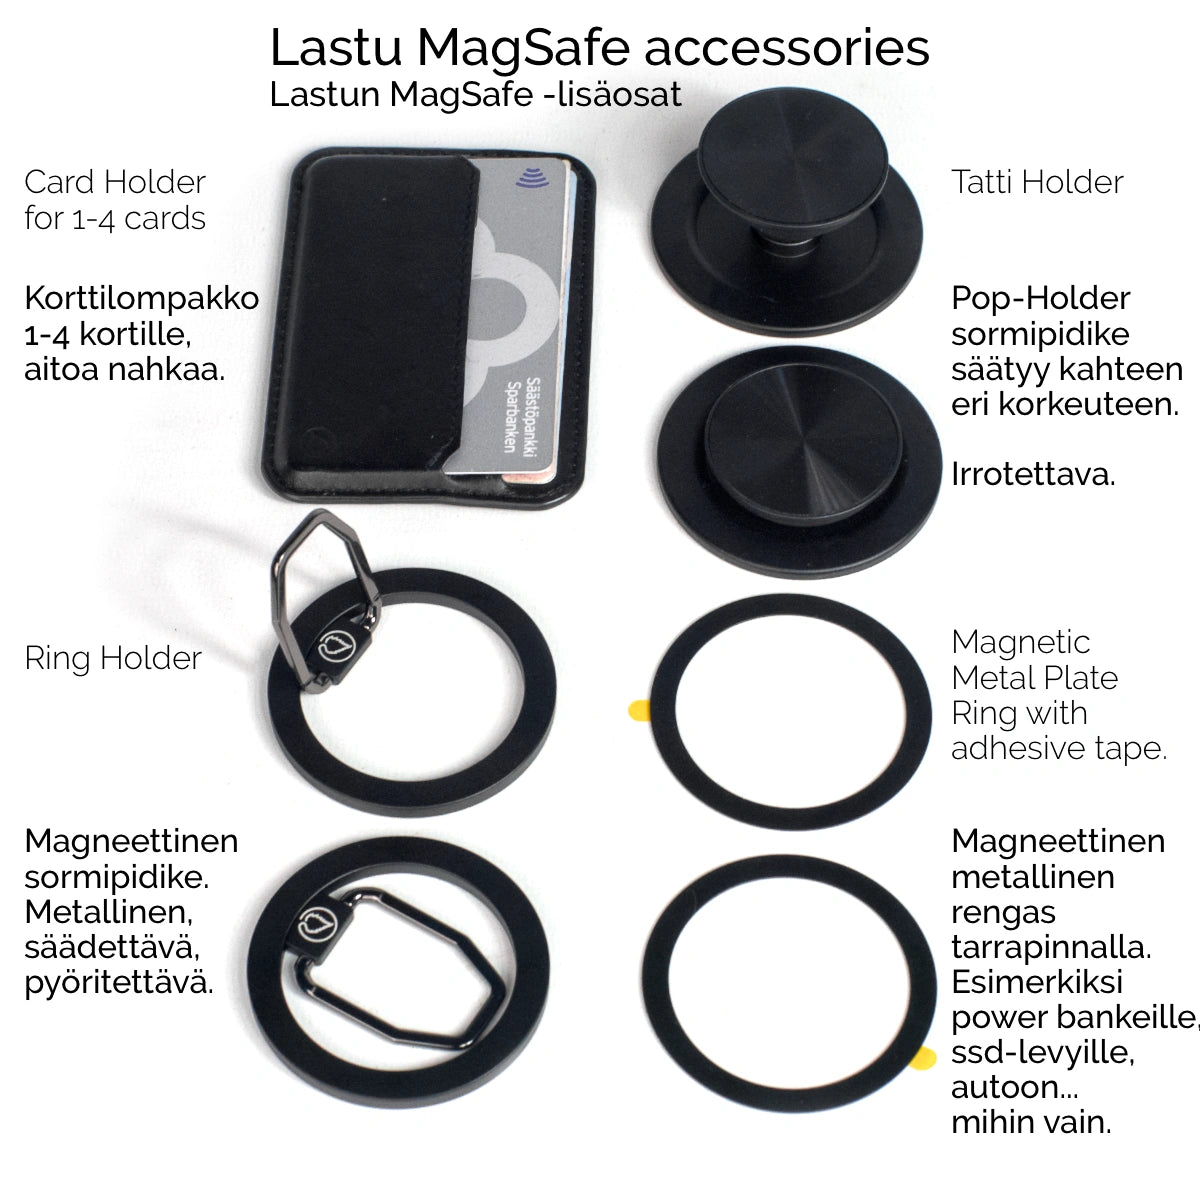 the contents of a cell phone and accessories